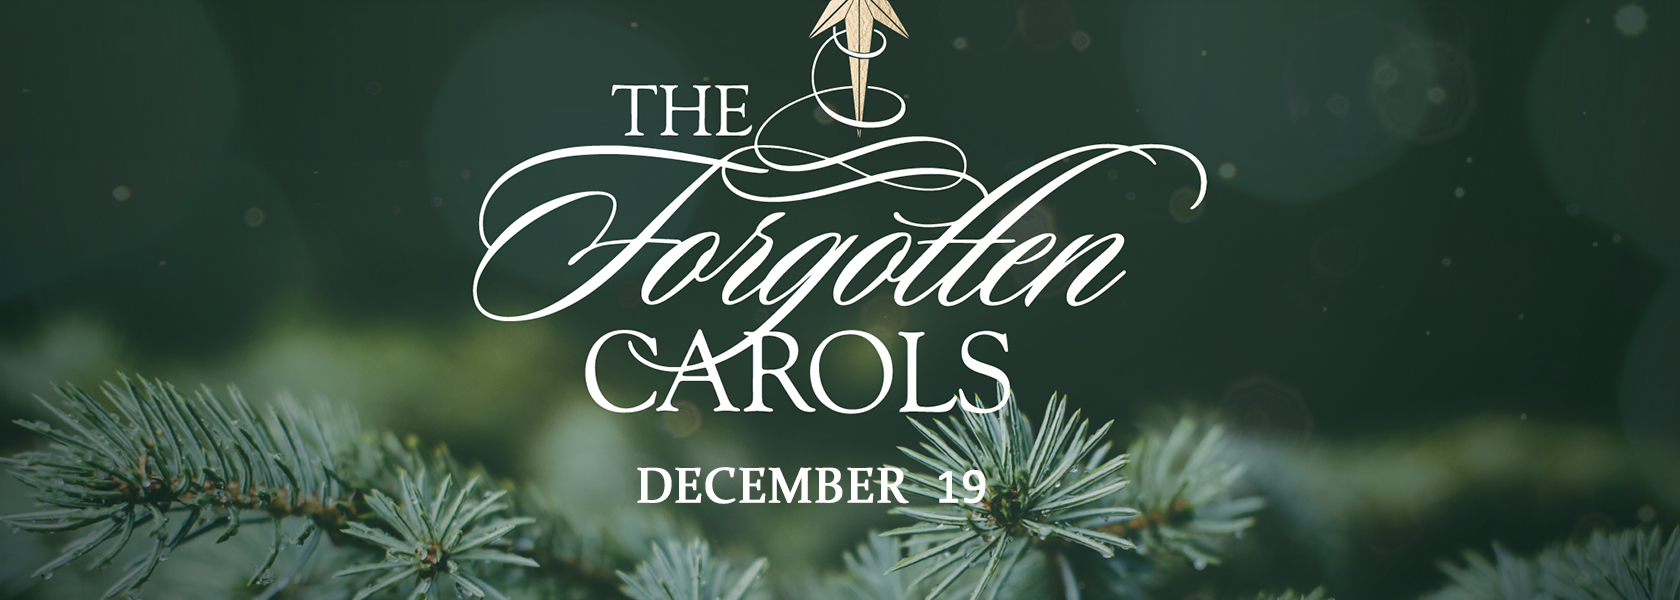 Come join the magic and experience The Forgotten Carols